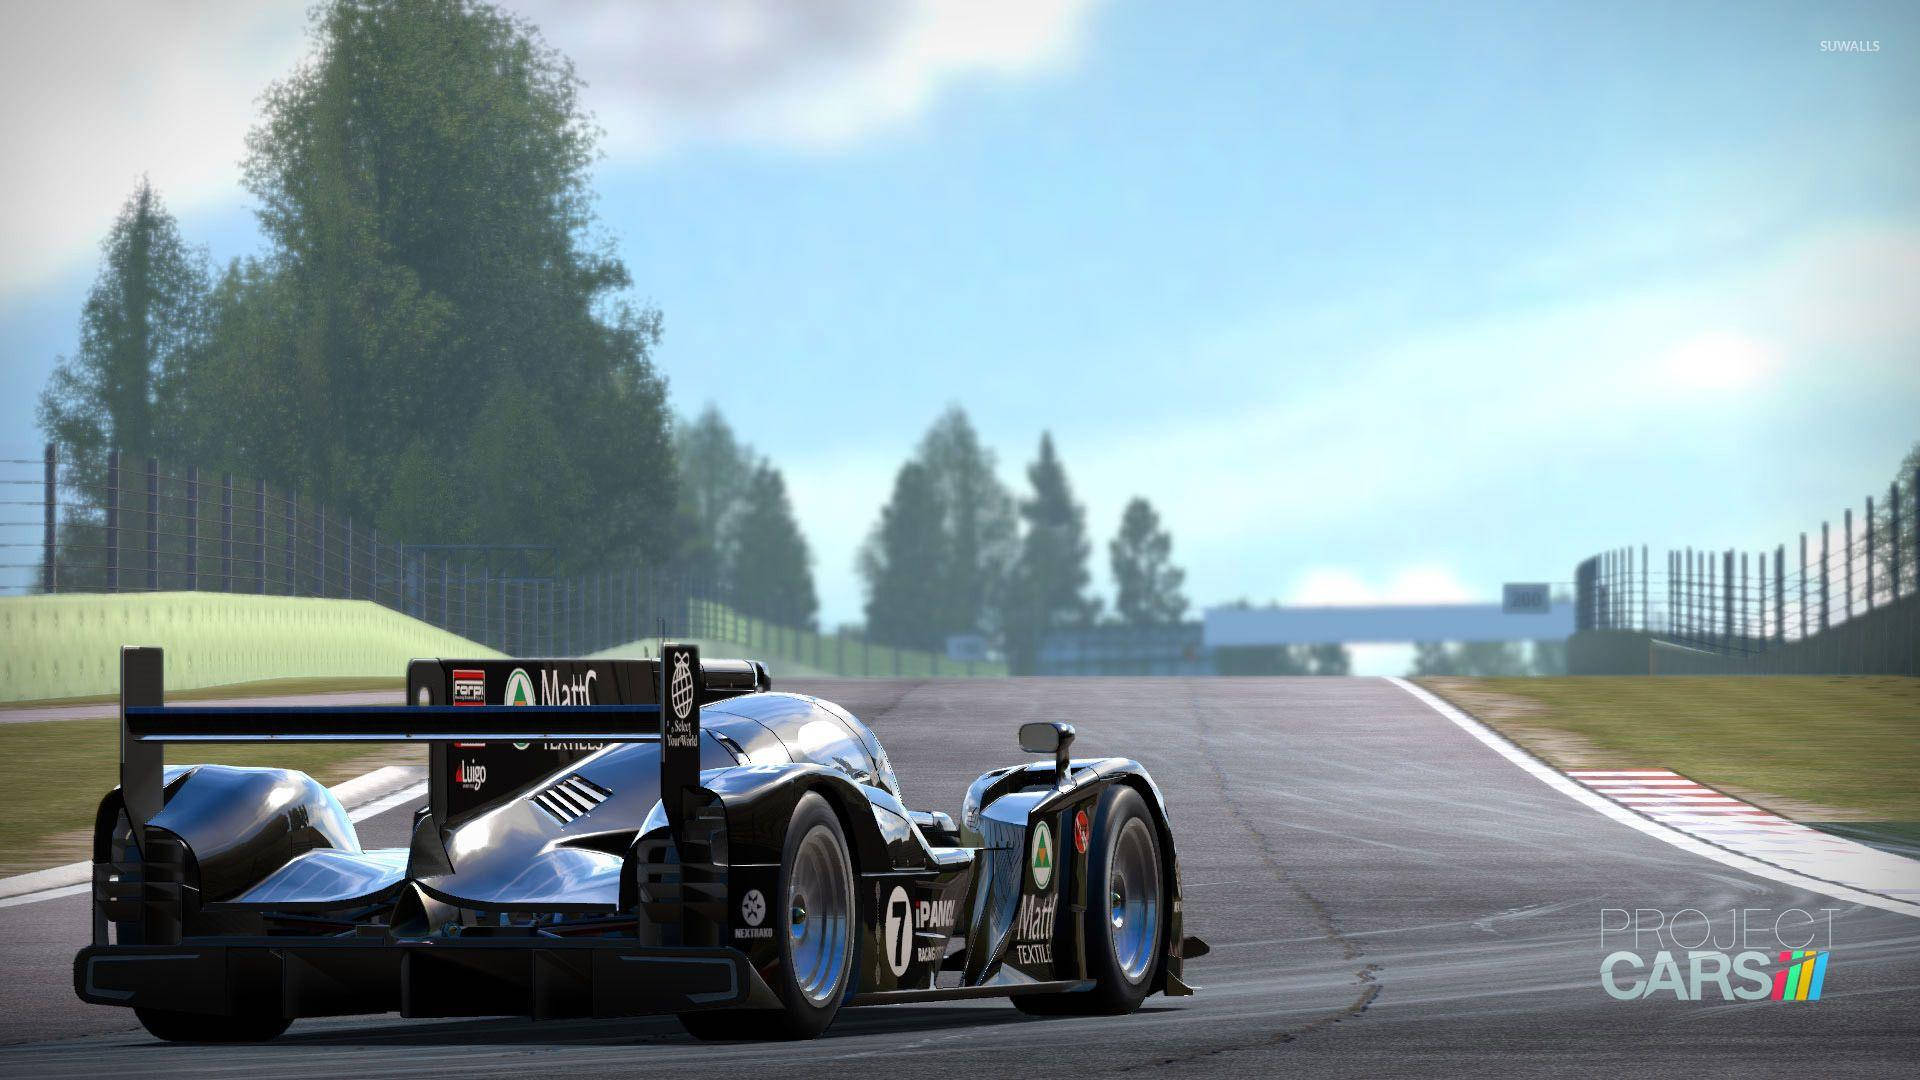 Project Cars 2 Blue Formula One Car Background